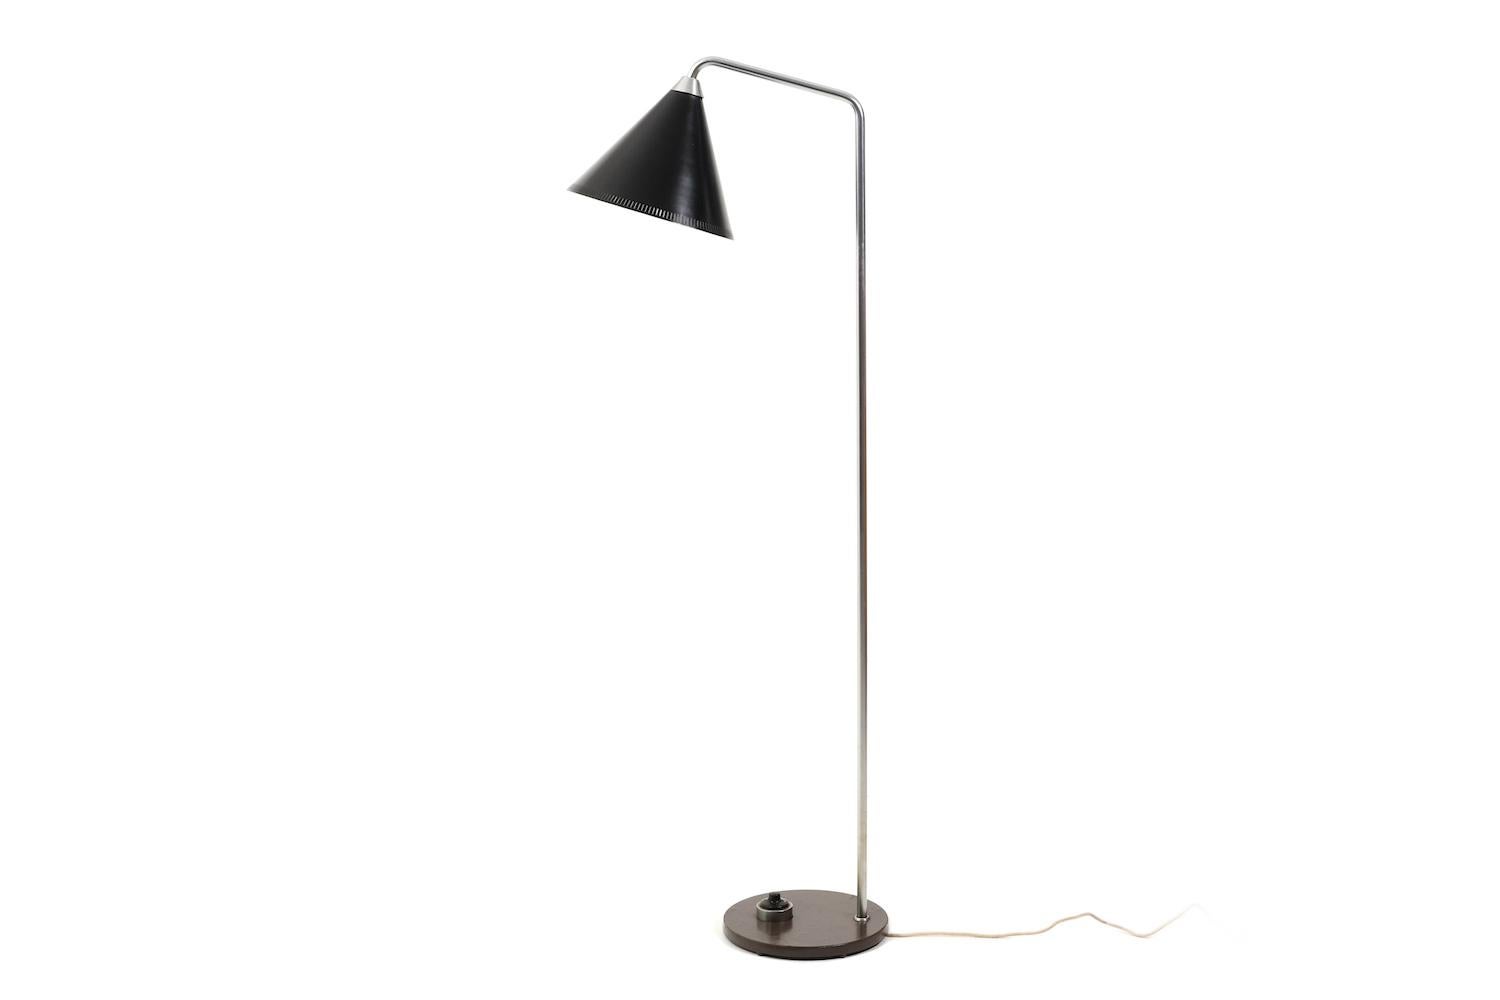 Floor lamp by Peter Hvidt for LYFA Denmark 1950s. With black conical metal shade. Dark brown lacquered base and steel lamp shaft. We have the same lamp with red shade here at 1stDibs